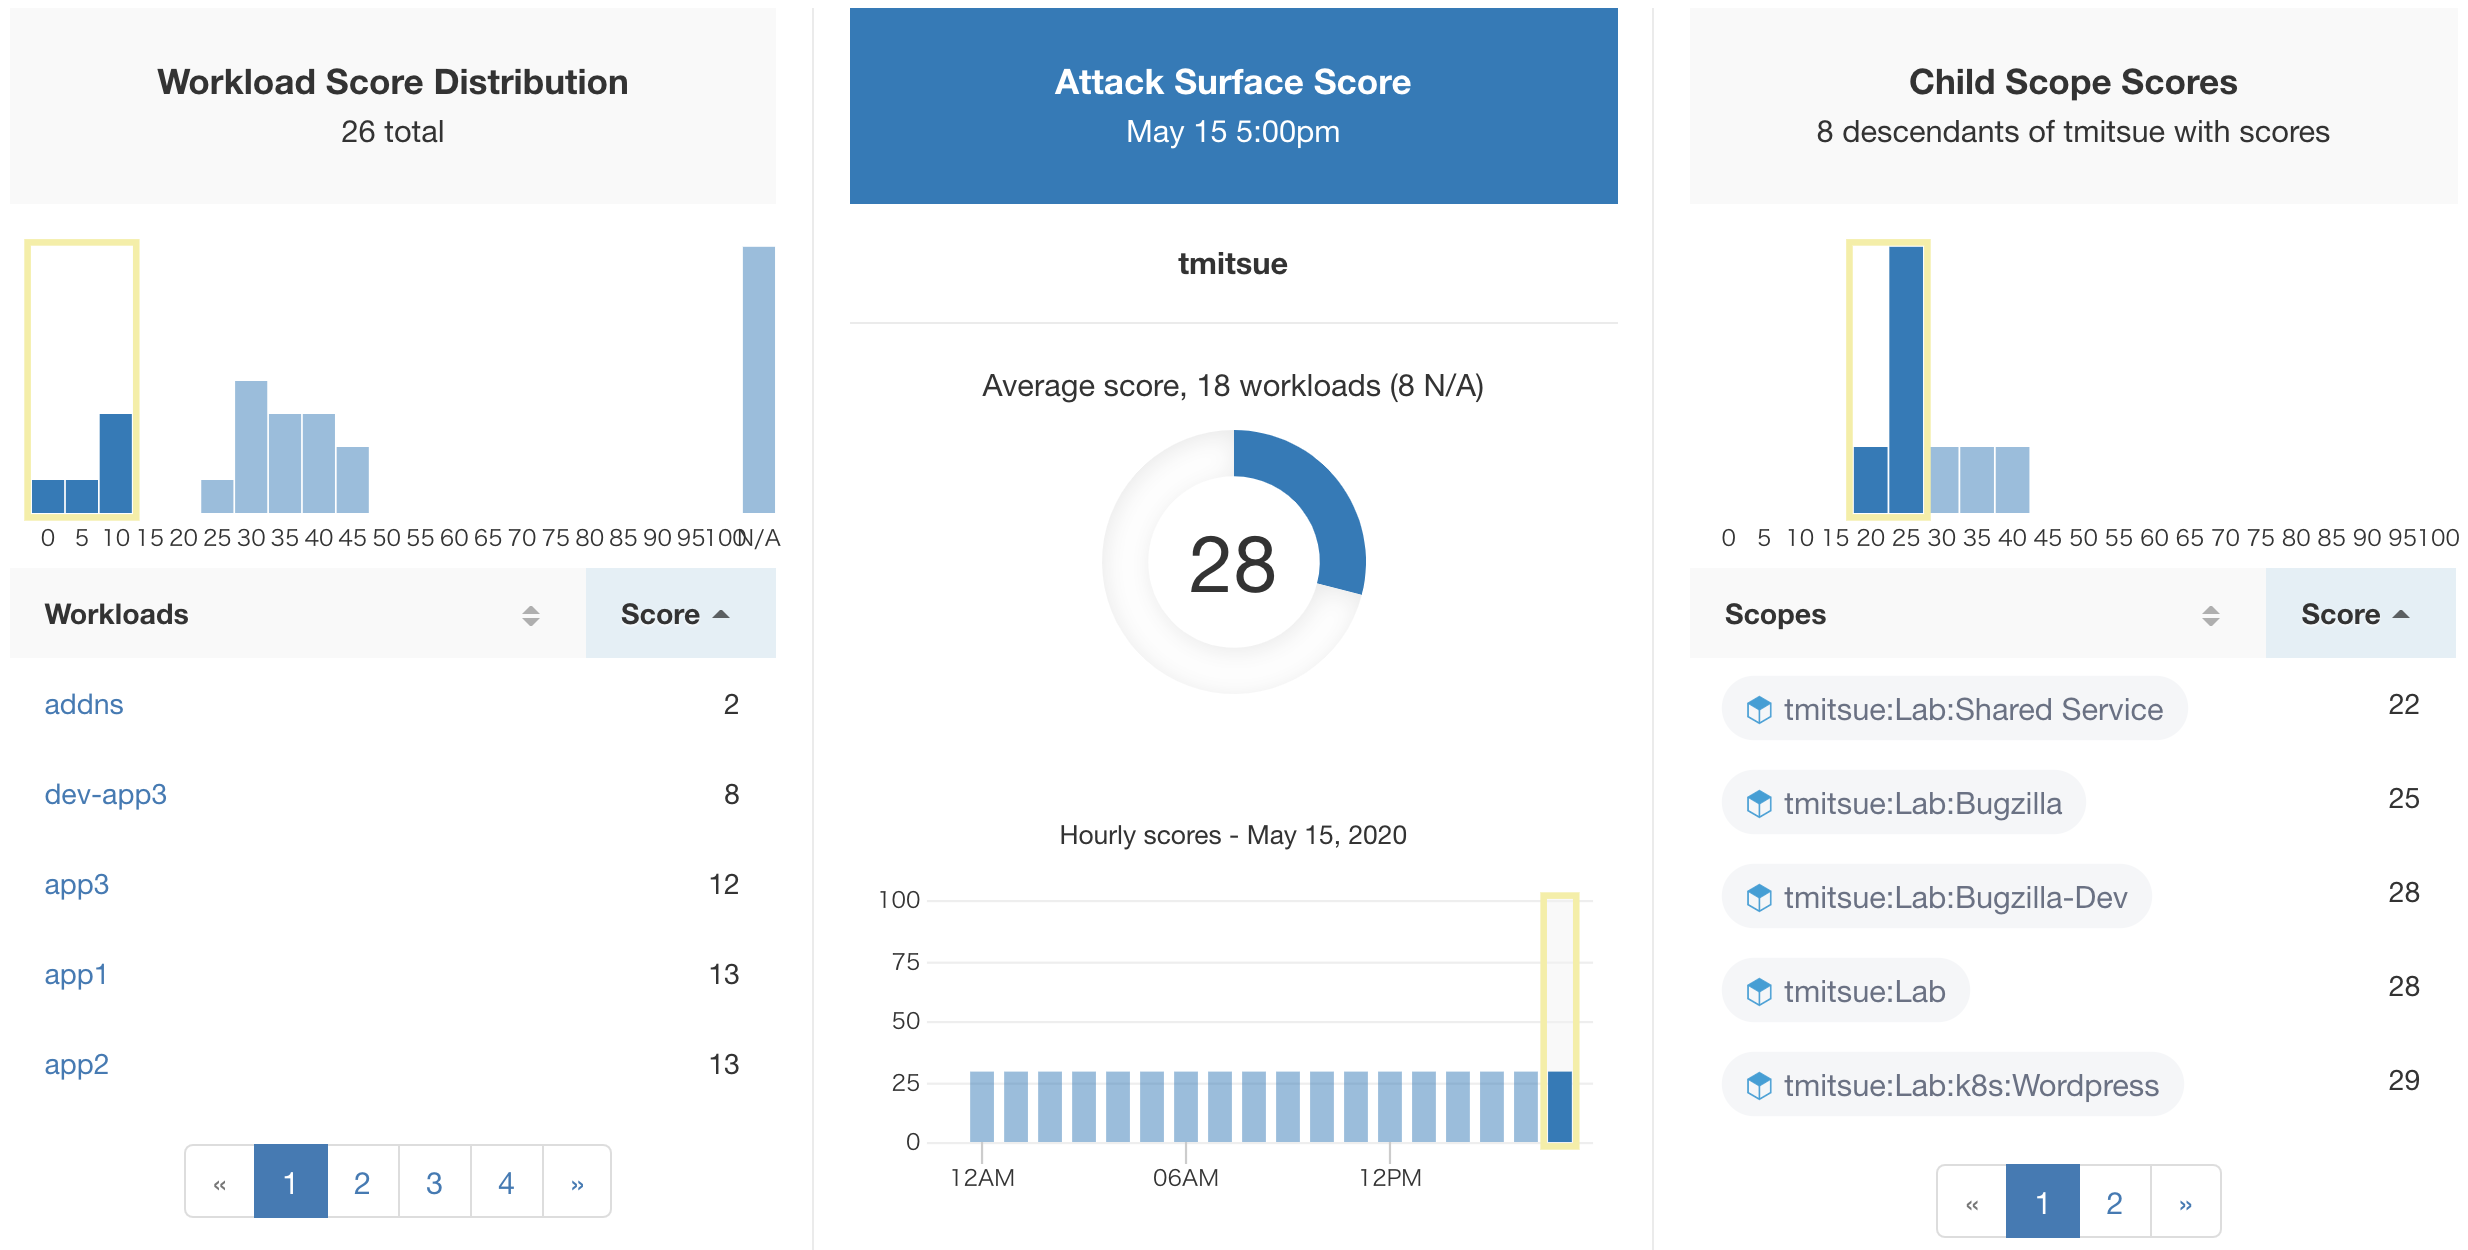 Attack Surface Score - Tetration "SECURITY DASHBOARD" 